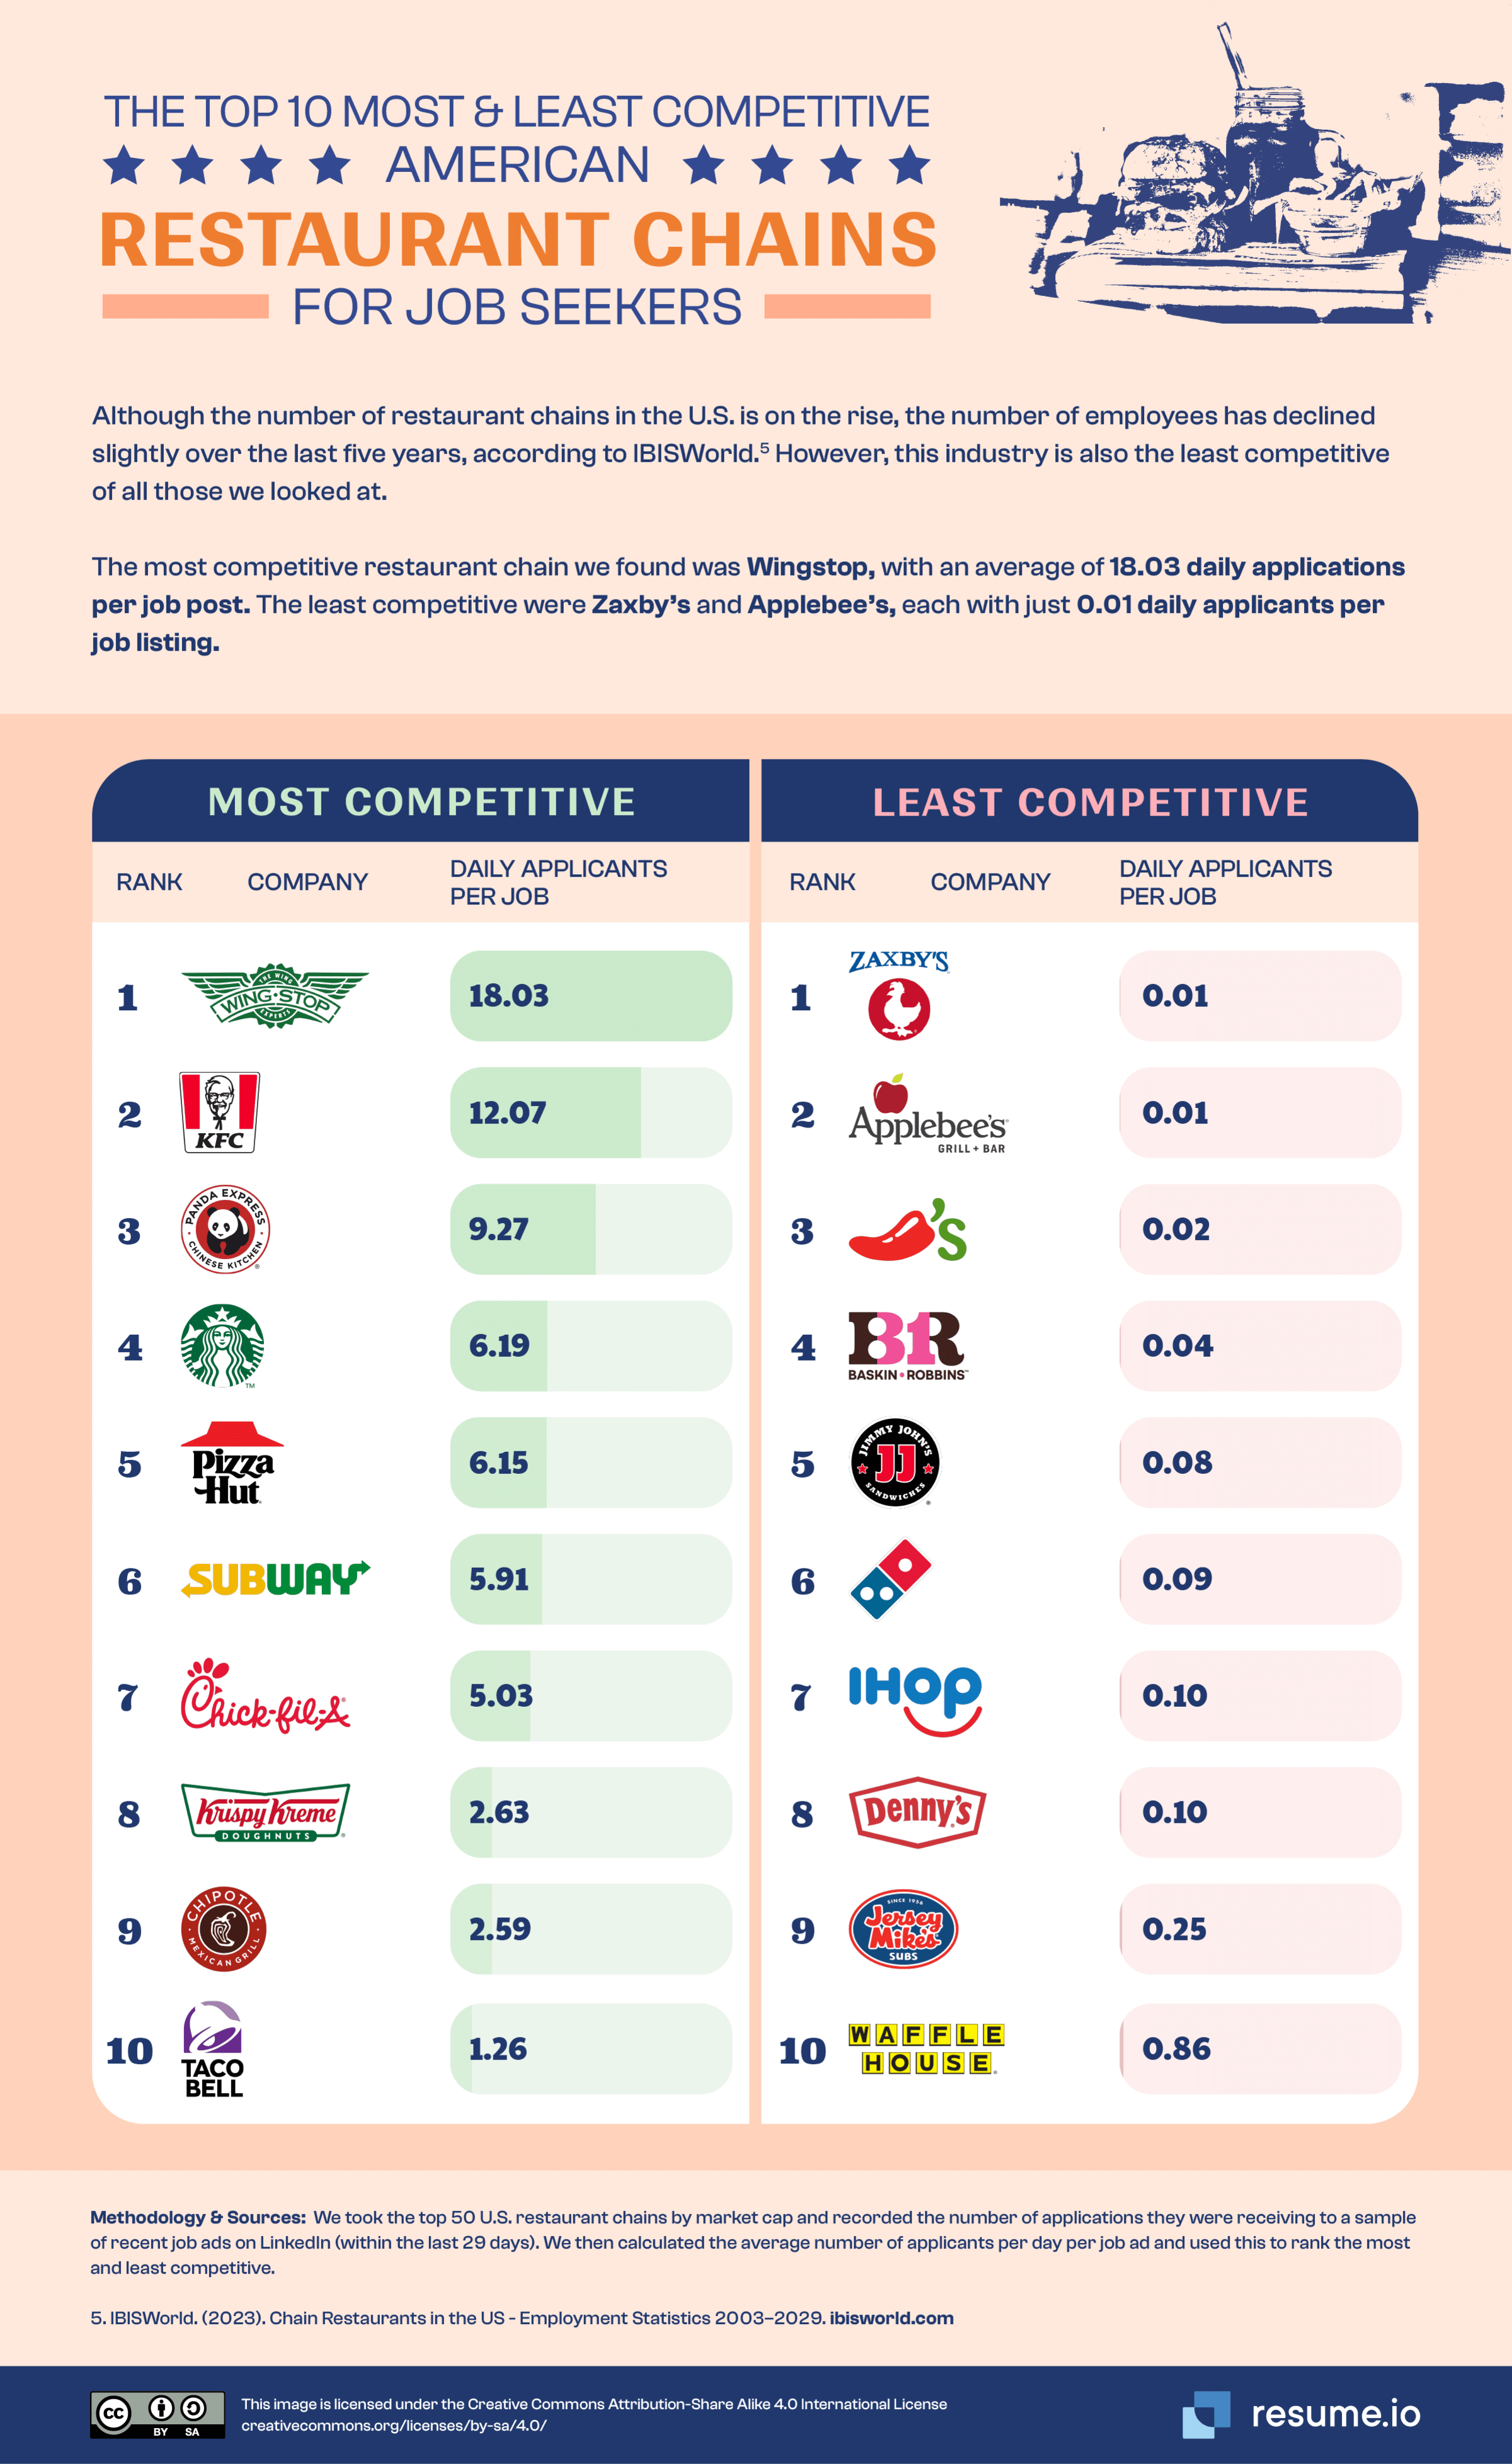 Top 10 most and least competitive restaurant chains